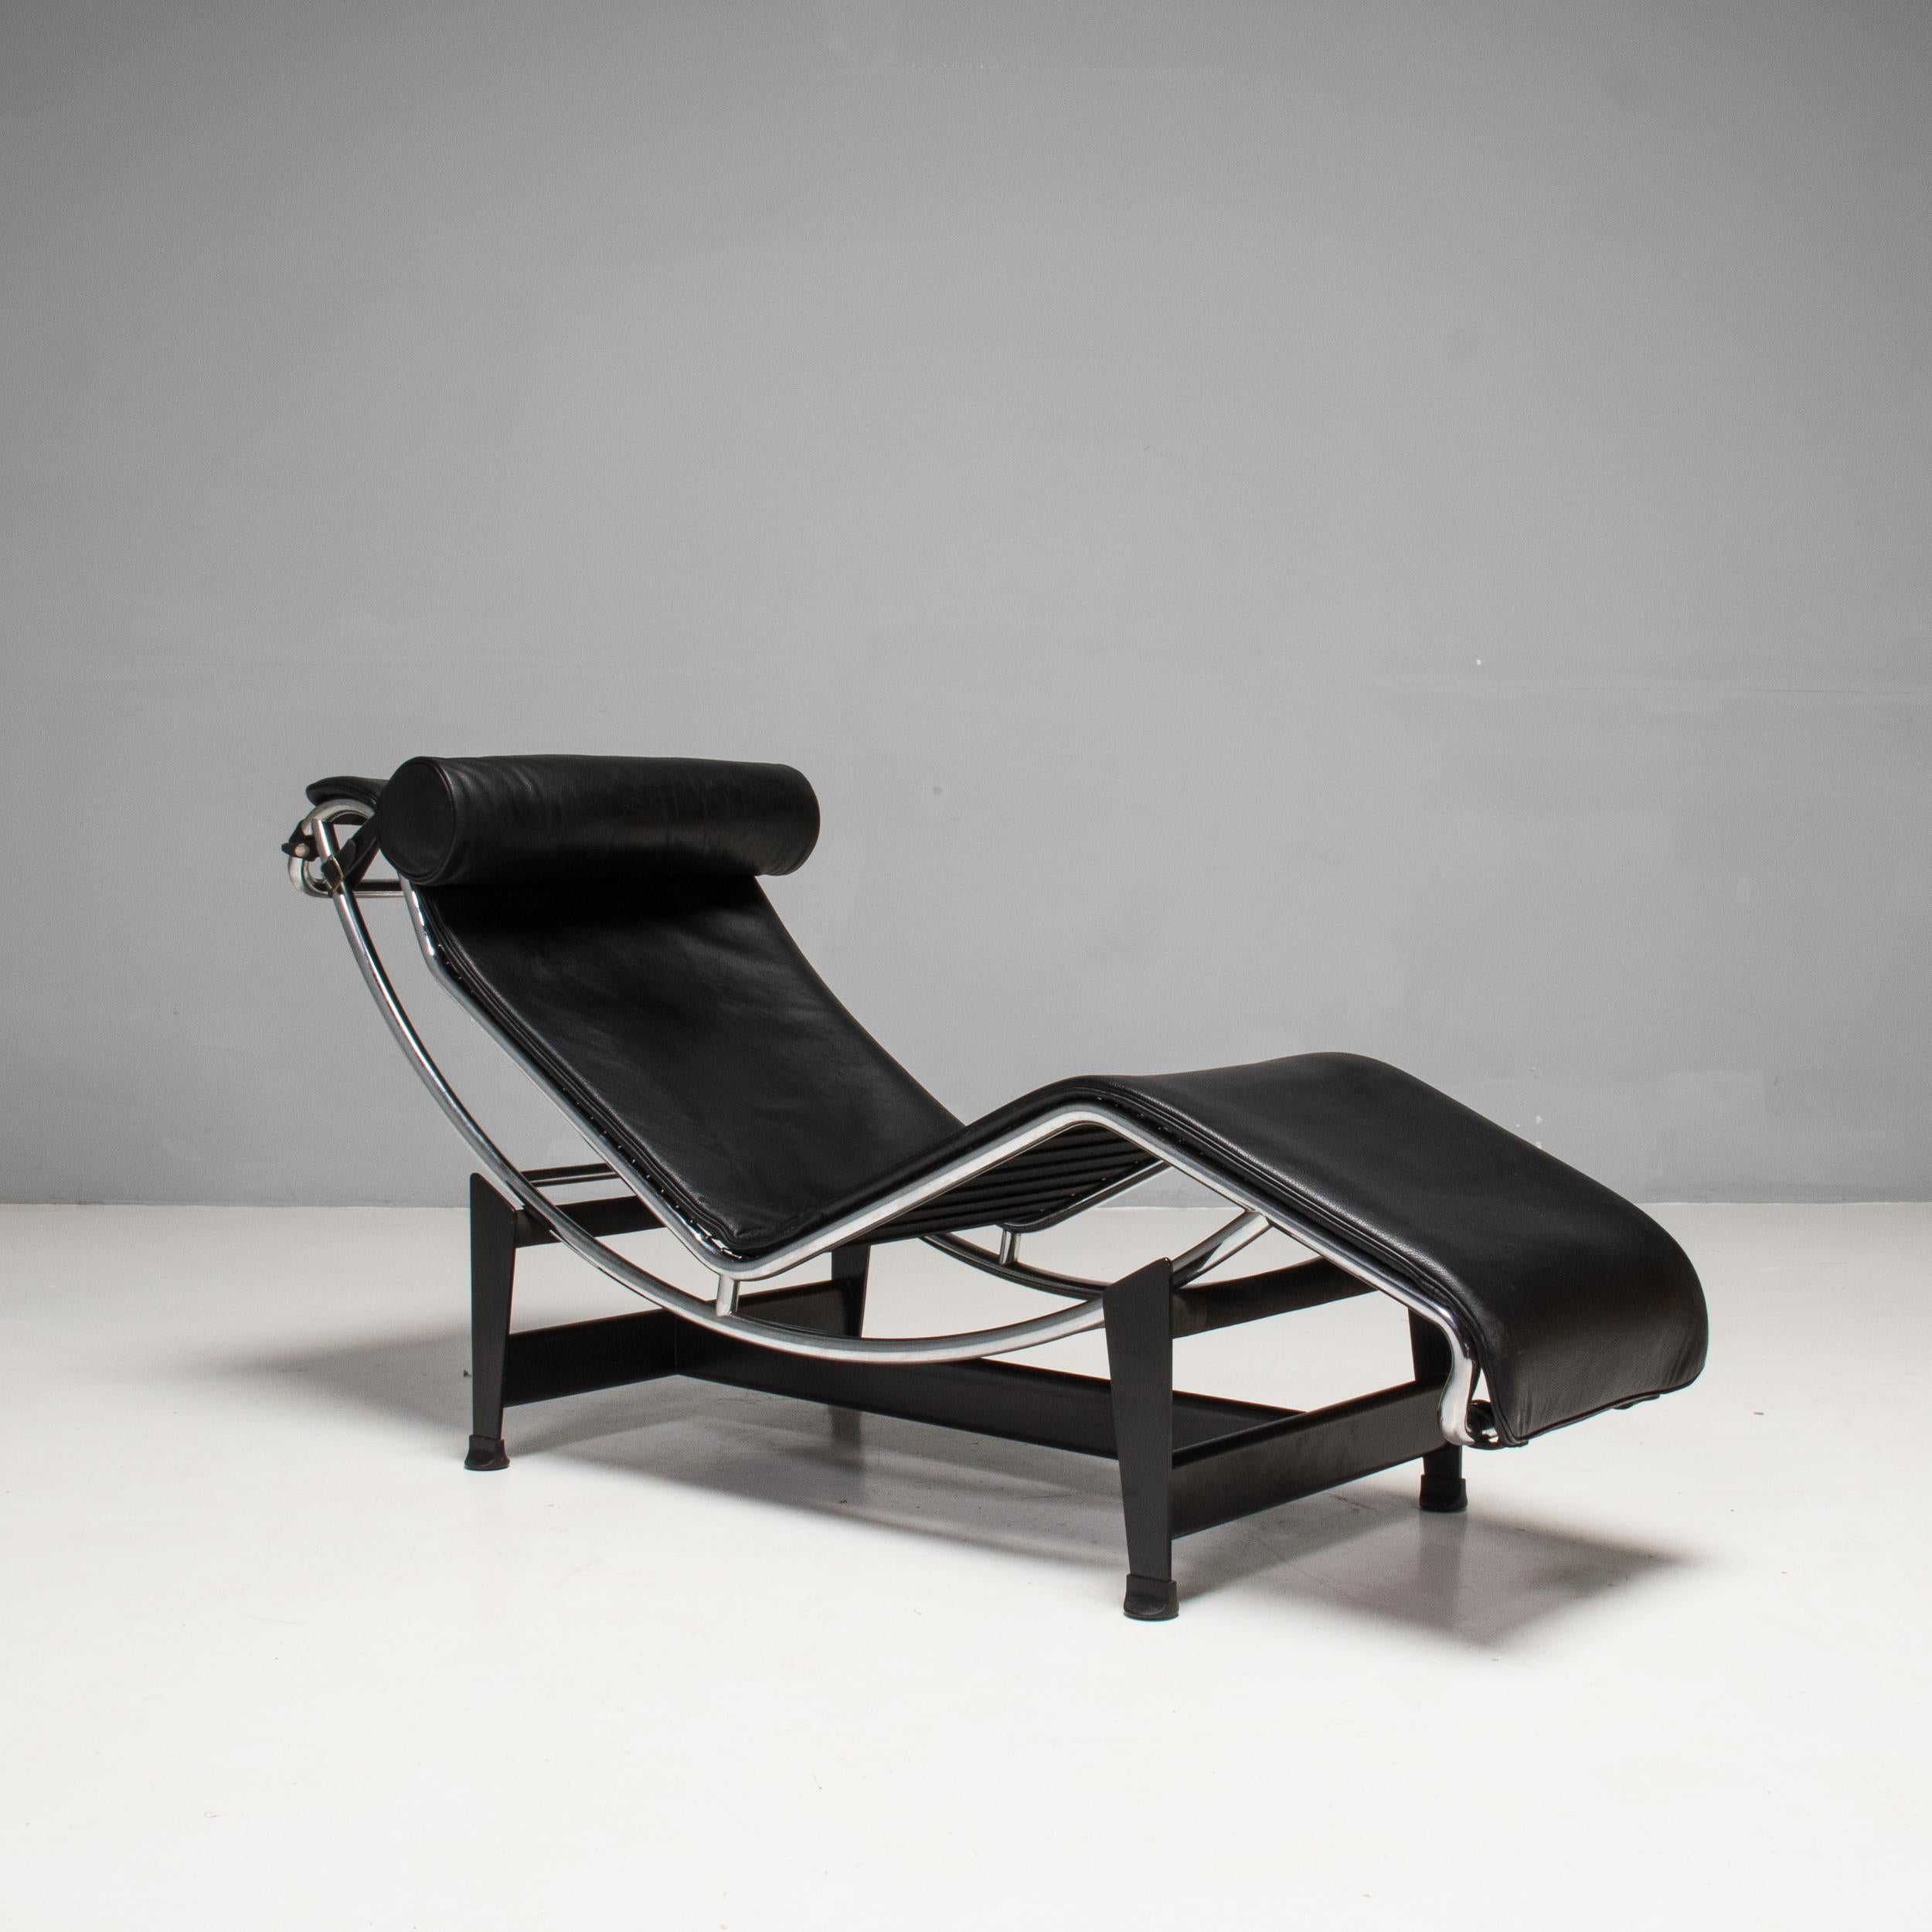 Now known as the 4 Chaise Longue à Reglage Continu, the LC4 chaise longue was originally introduced at the Salon d’Automne in 1929 by the designers Le Corbusier, Pierre Jeanneret and Charlotte Perriand.

Since then the LC4 chaise has become one of